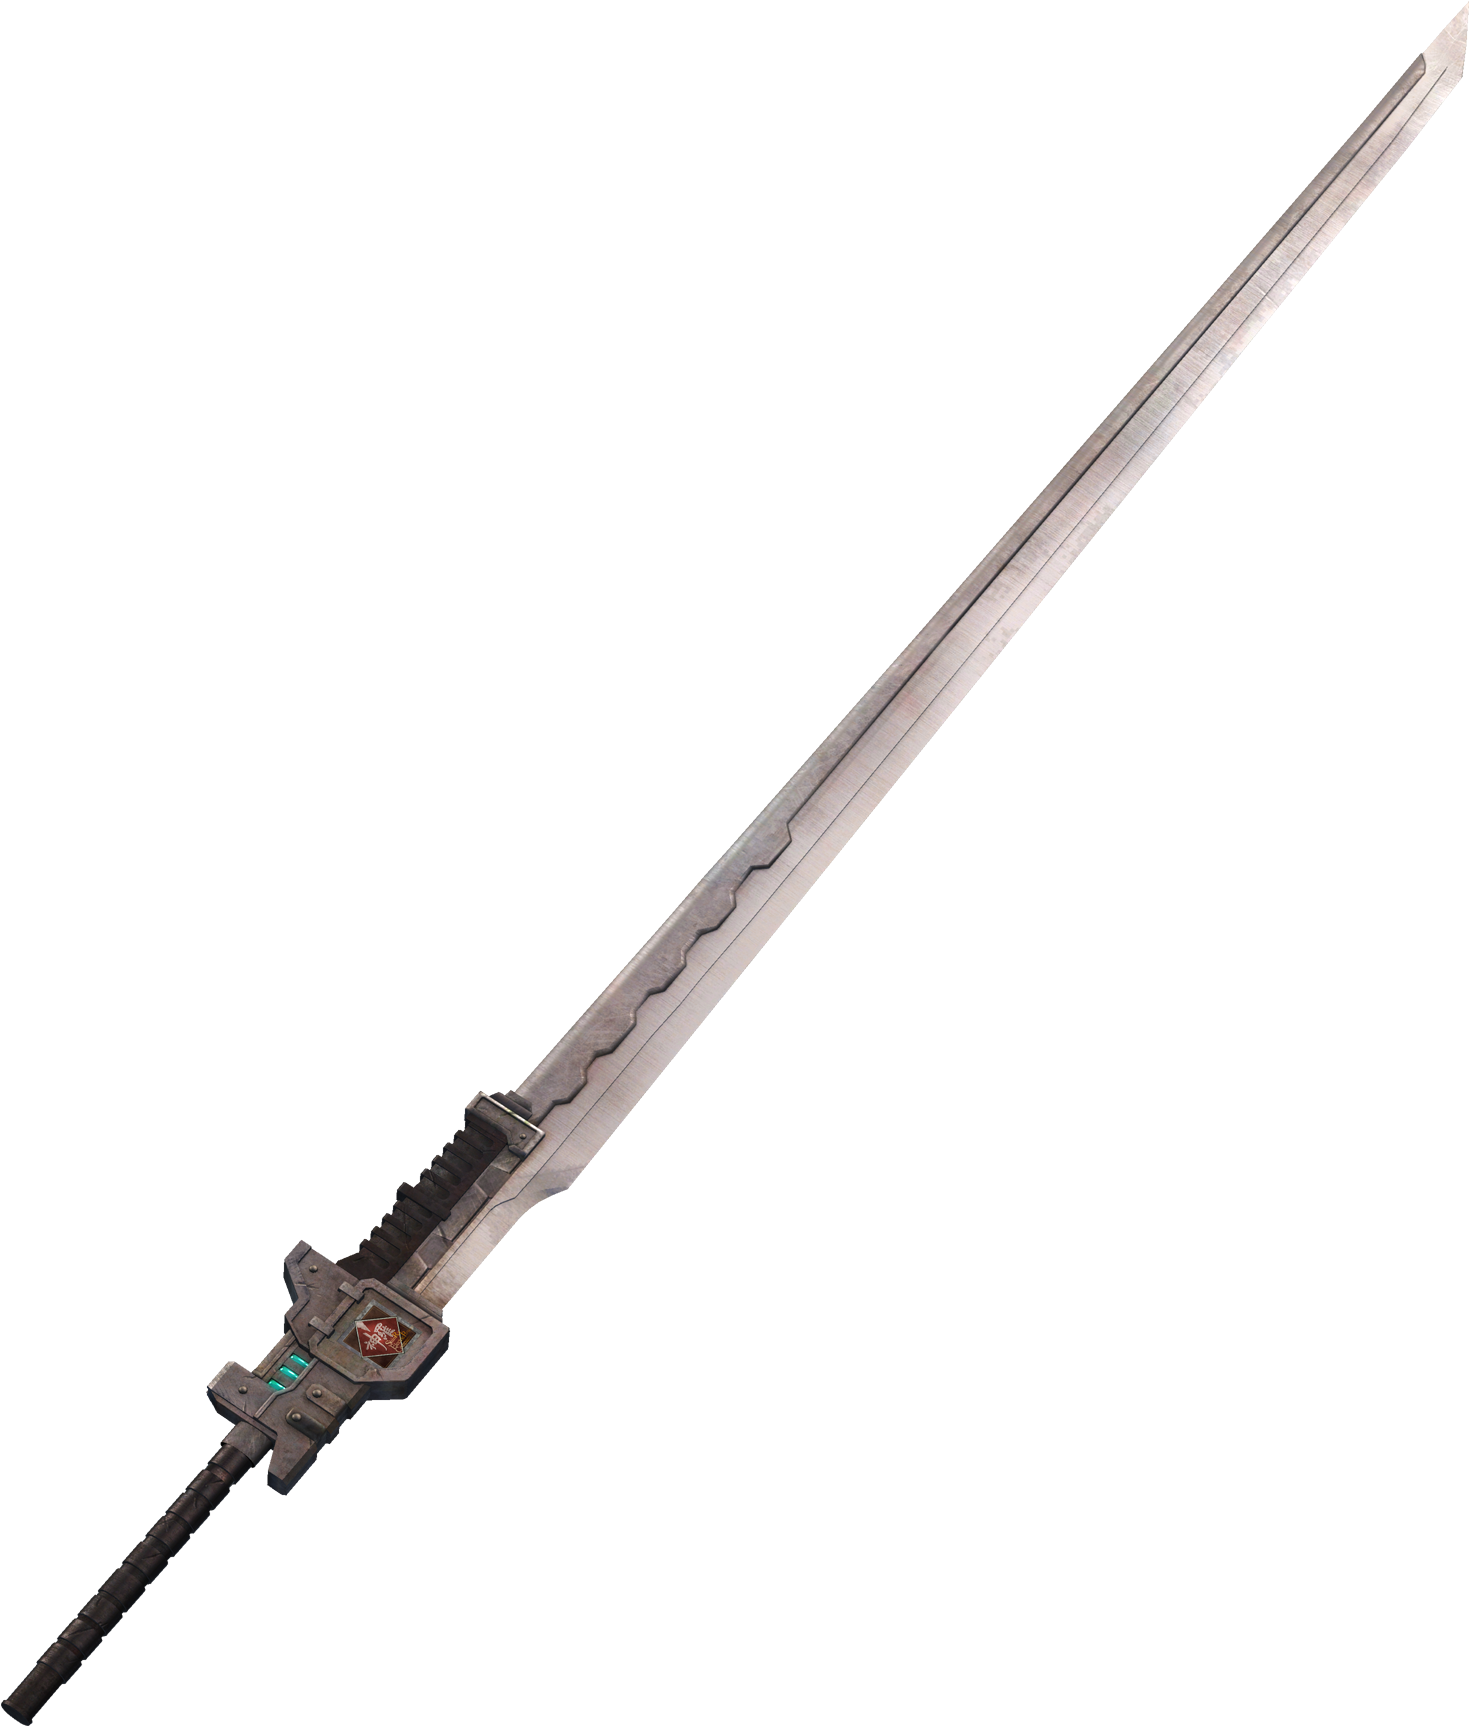 A Sword With A Black Background